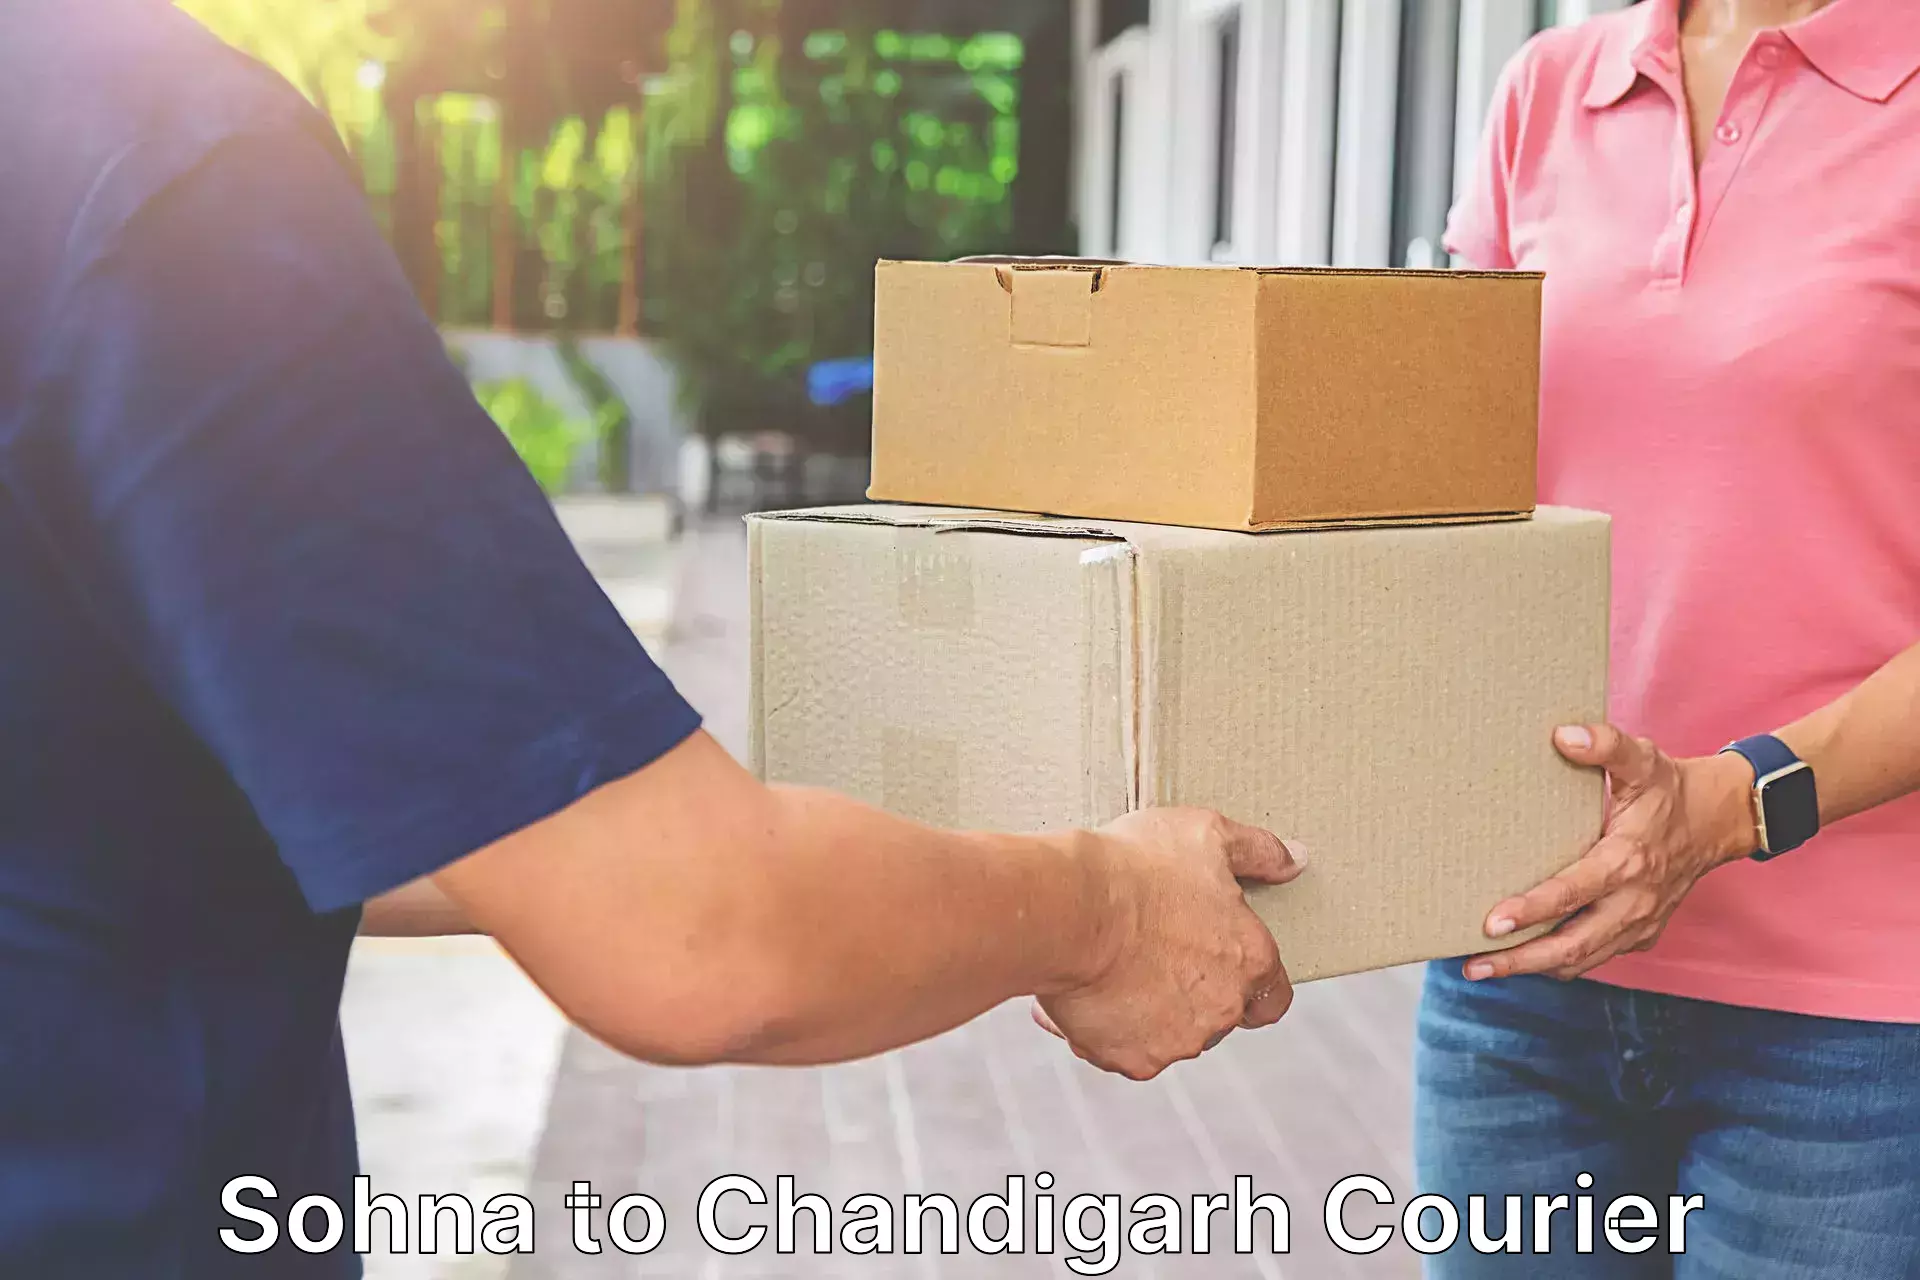 Global courier networks Sohna to Chandigarh